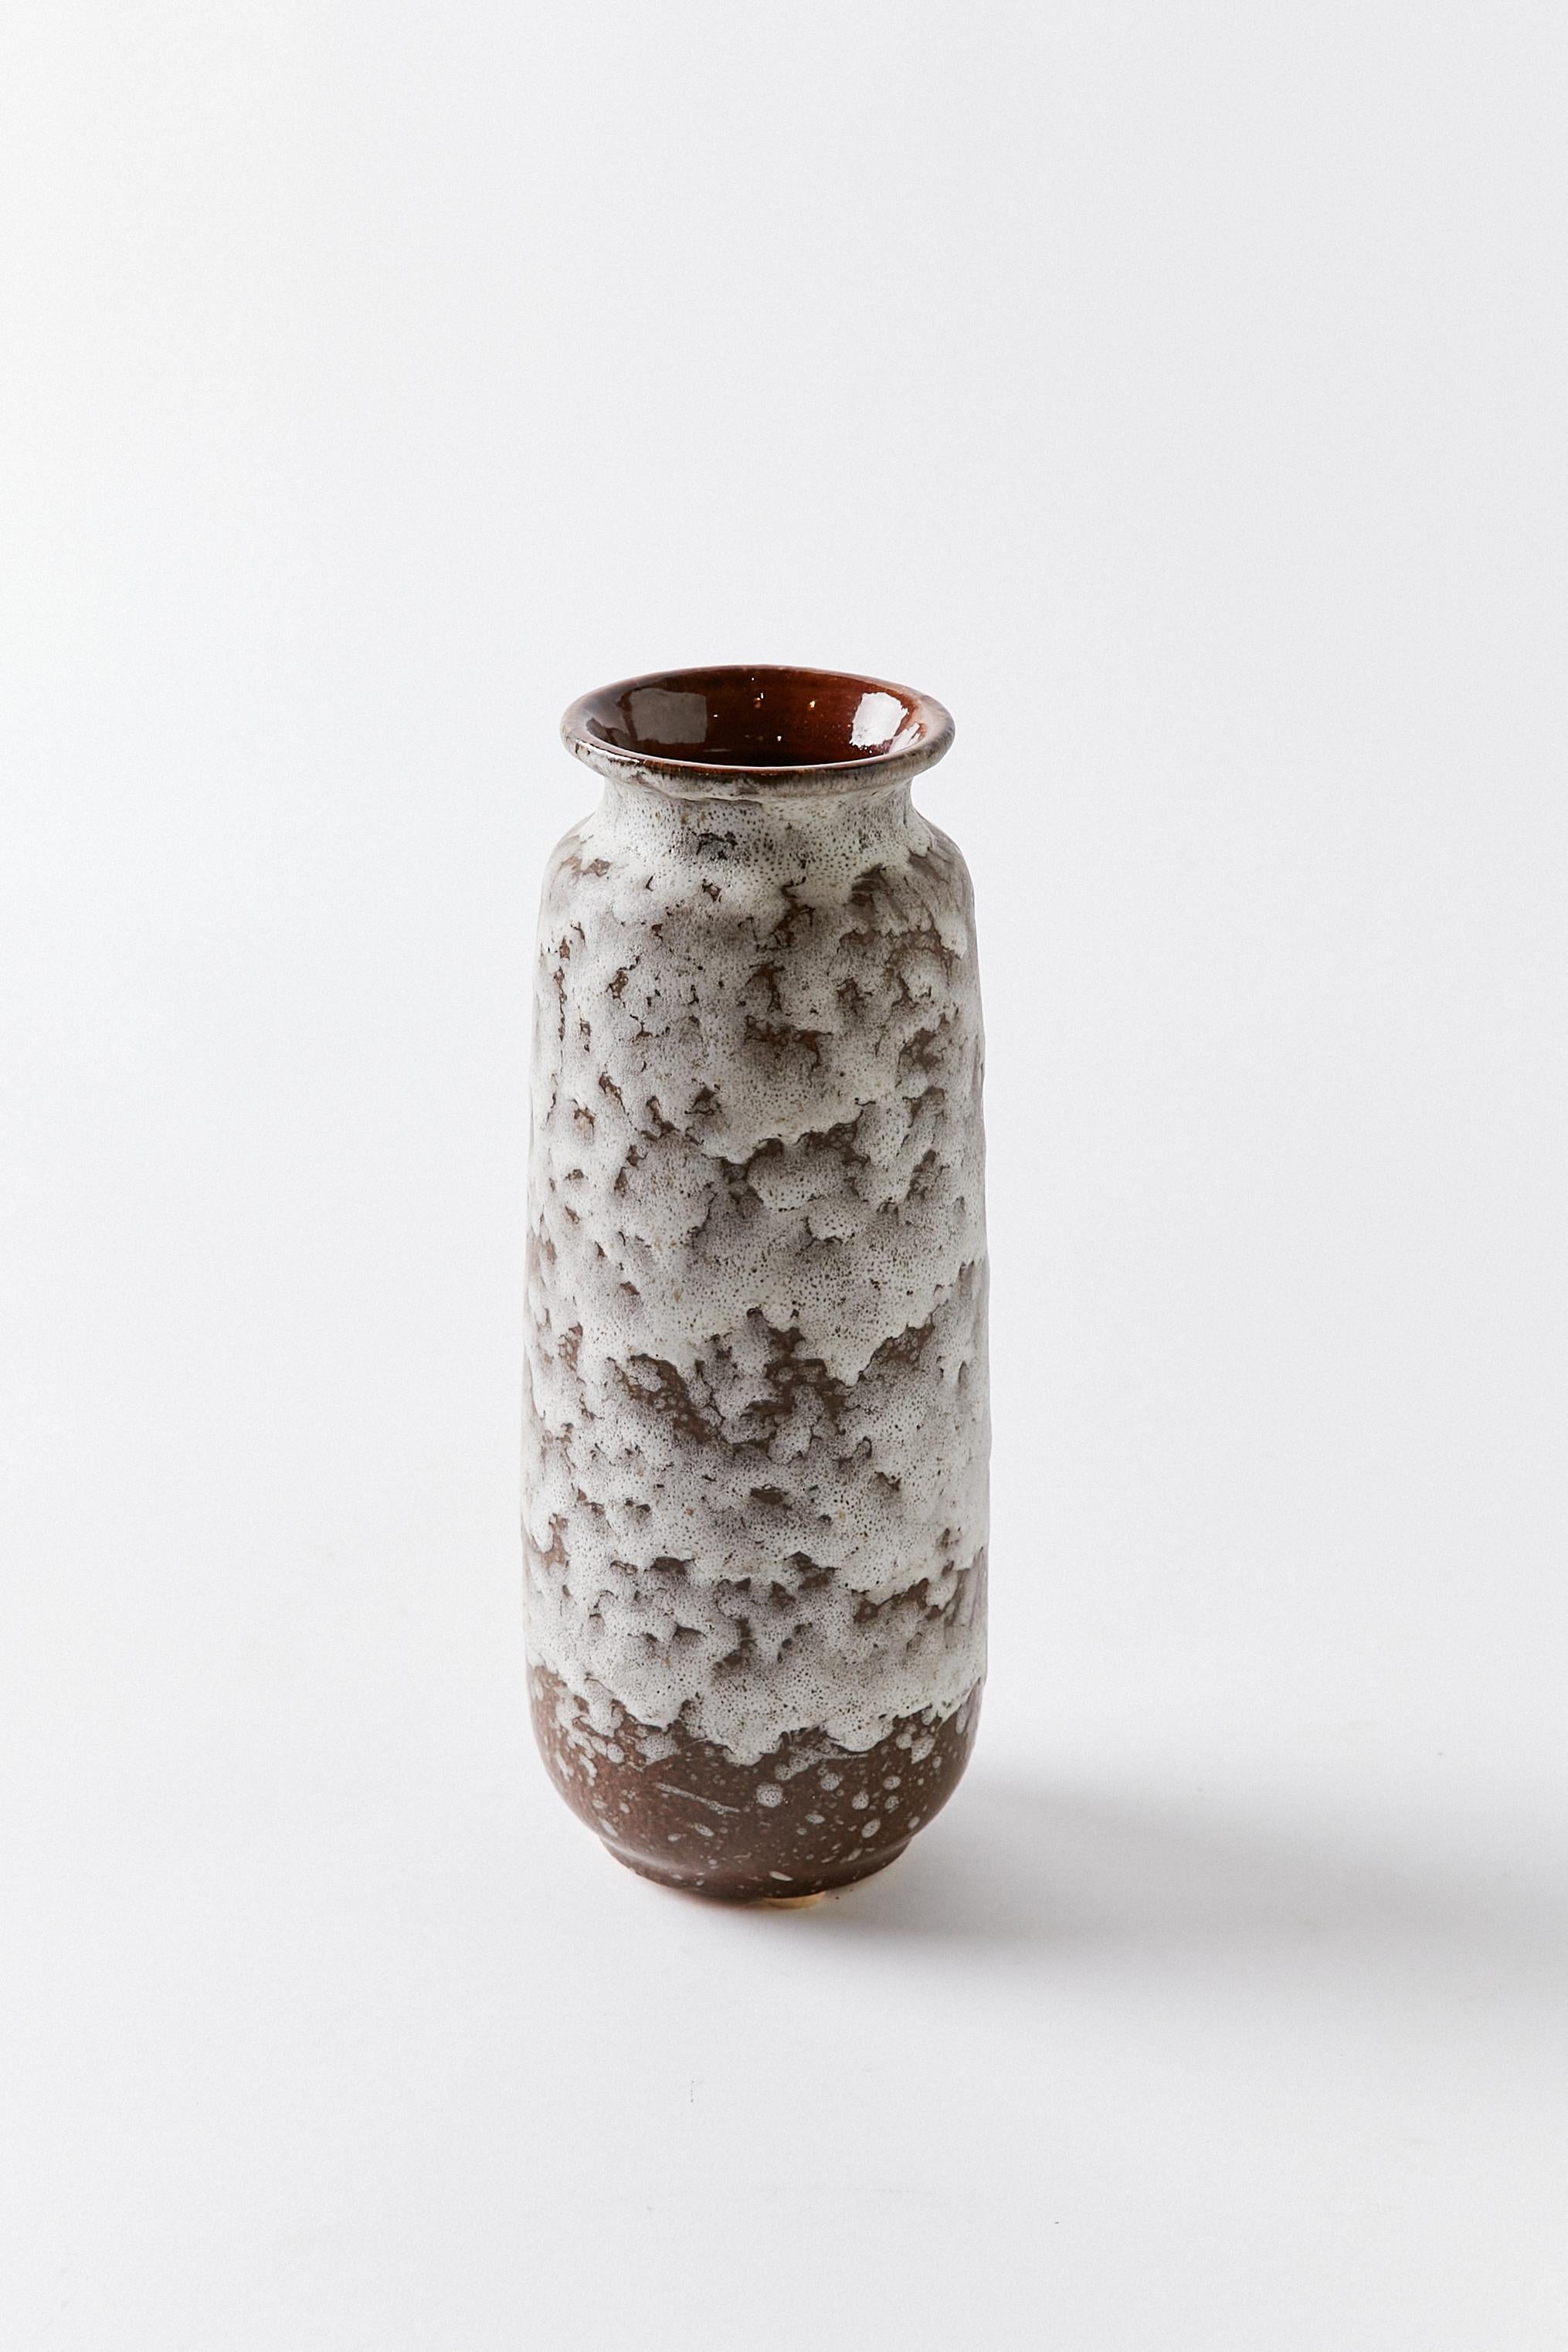 Fat lava vase with white textured finish by Scheurich Keramik, West Germany, 1960s. Signature stamp on bottom and label.